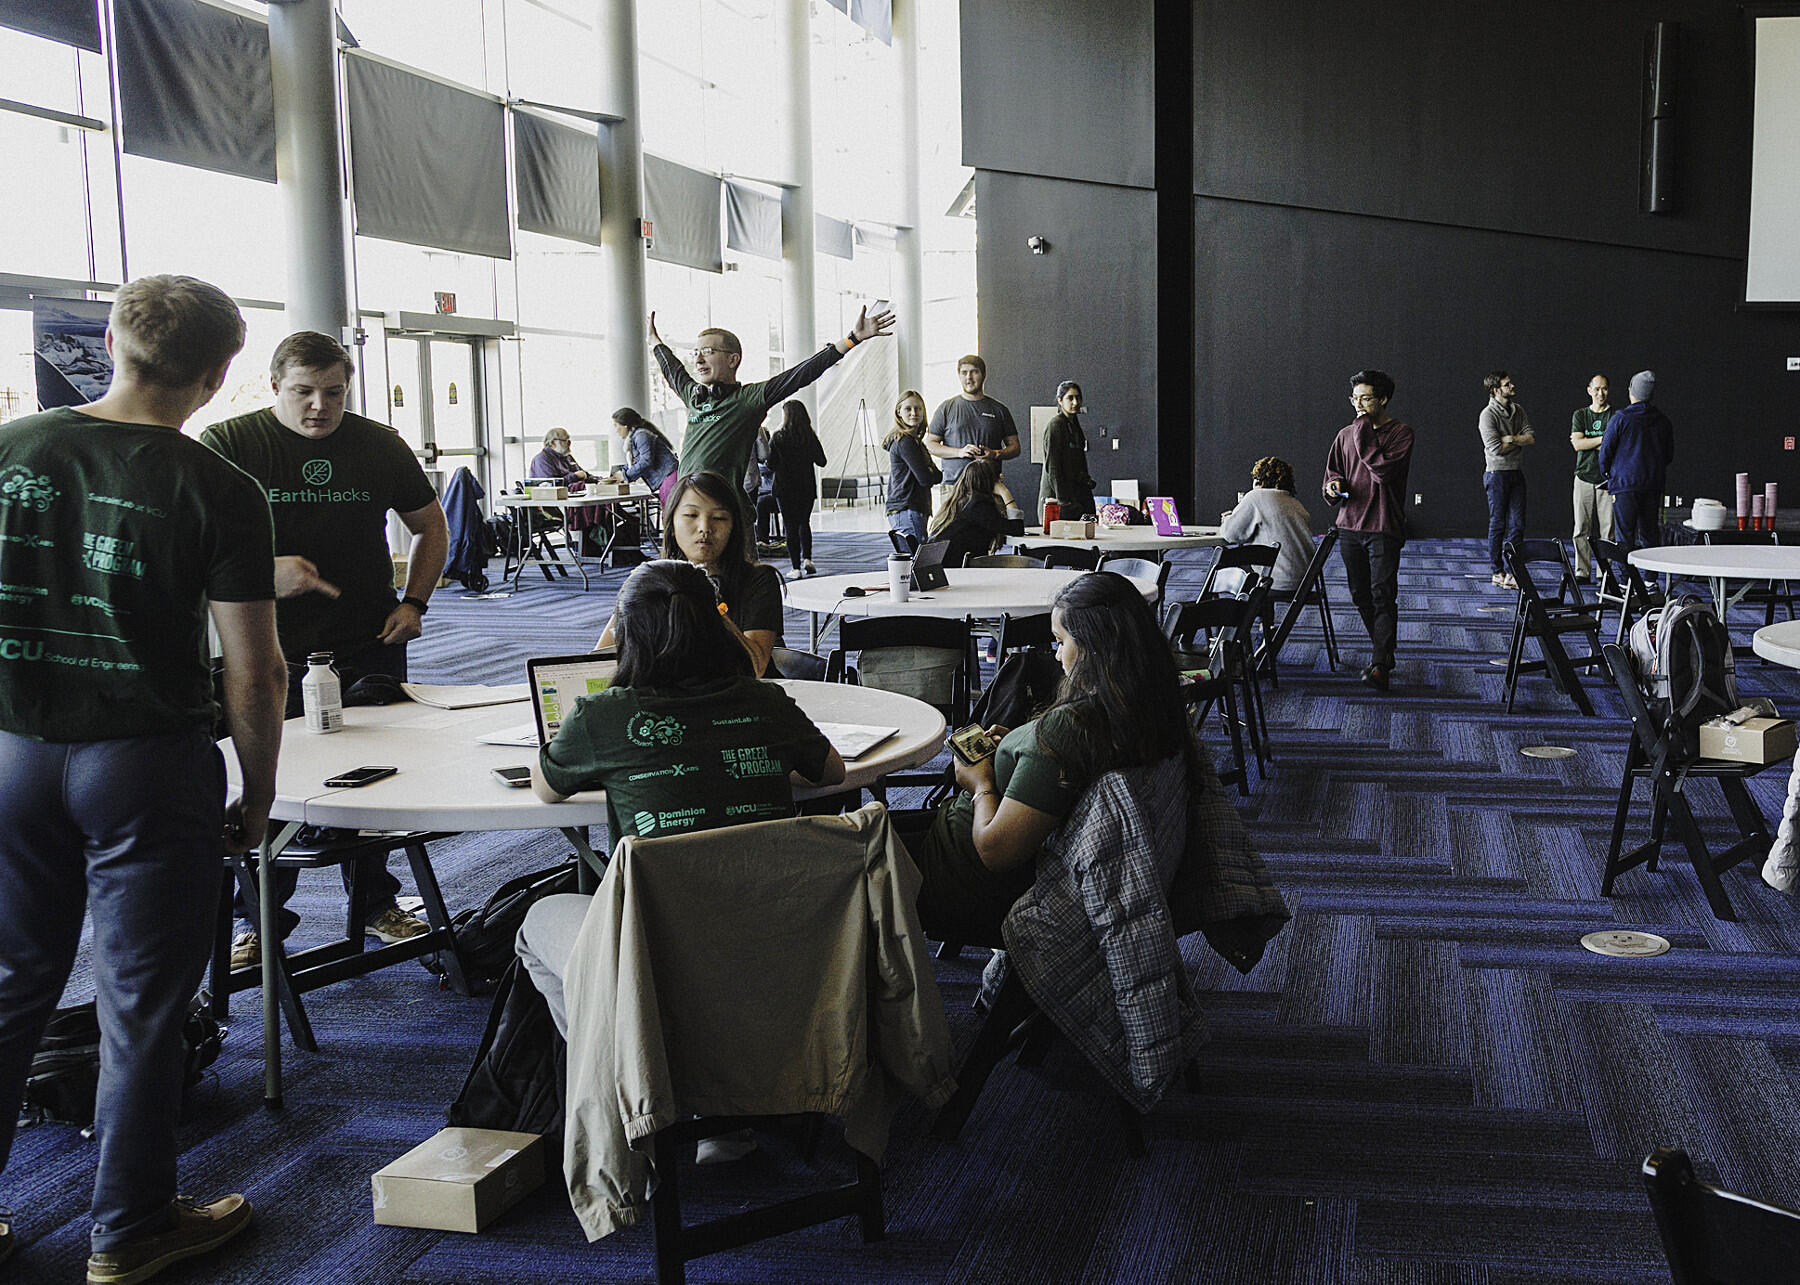 Dozens of students from disciplines such as engineering, computer science, biology, arts and business formed teams to solve a problem from one of three categories: pollution, conservation technology or renewable energy at VCU Engineering's EarthHacks.